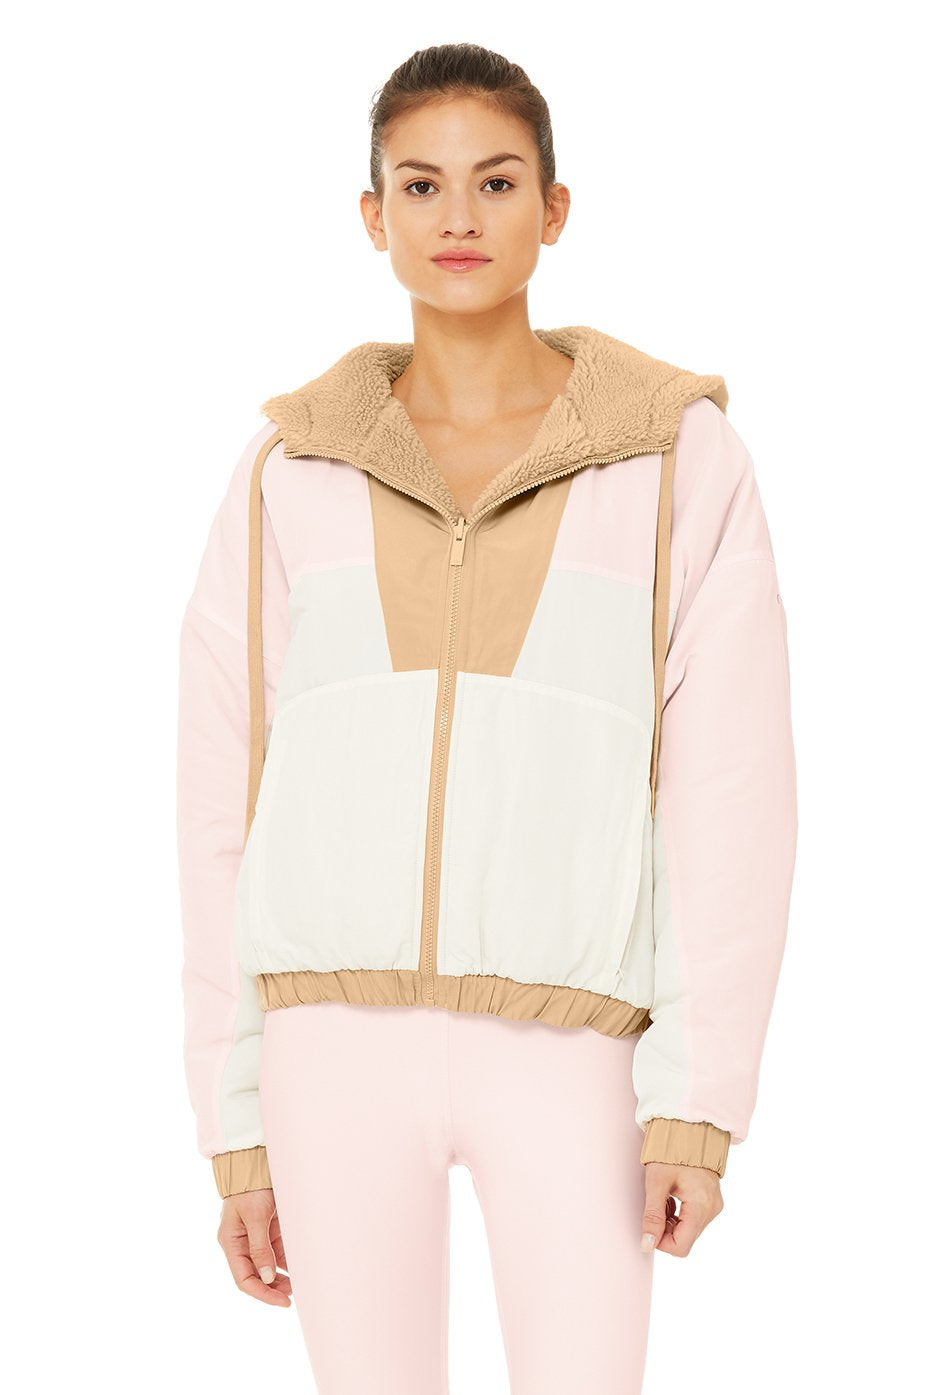 Duality Reversible Sherpa Jacket in Putty/Pristine/Soft Pink by Alo Yoga